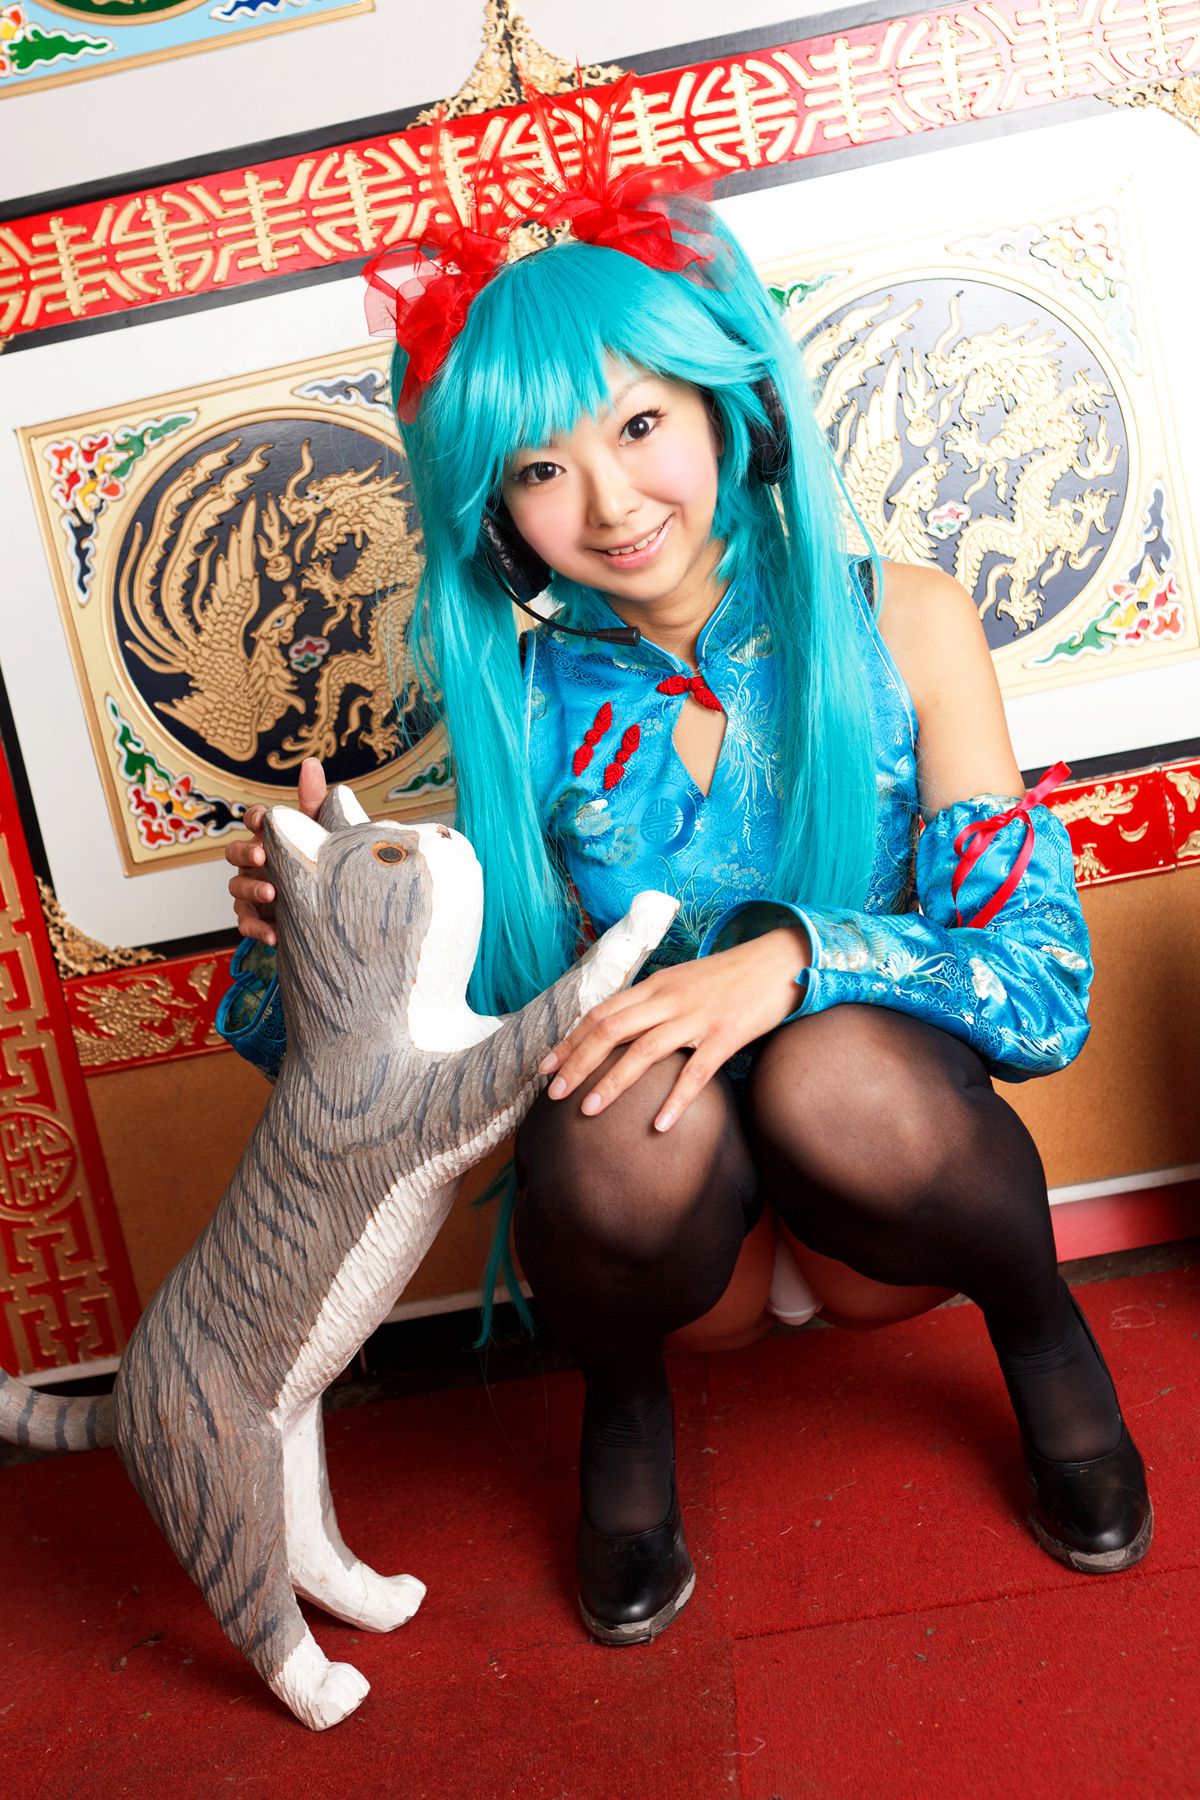 taotuhome[Cosplay] Necoco as Hatsune Miku from Vocaloid 套图第37张